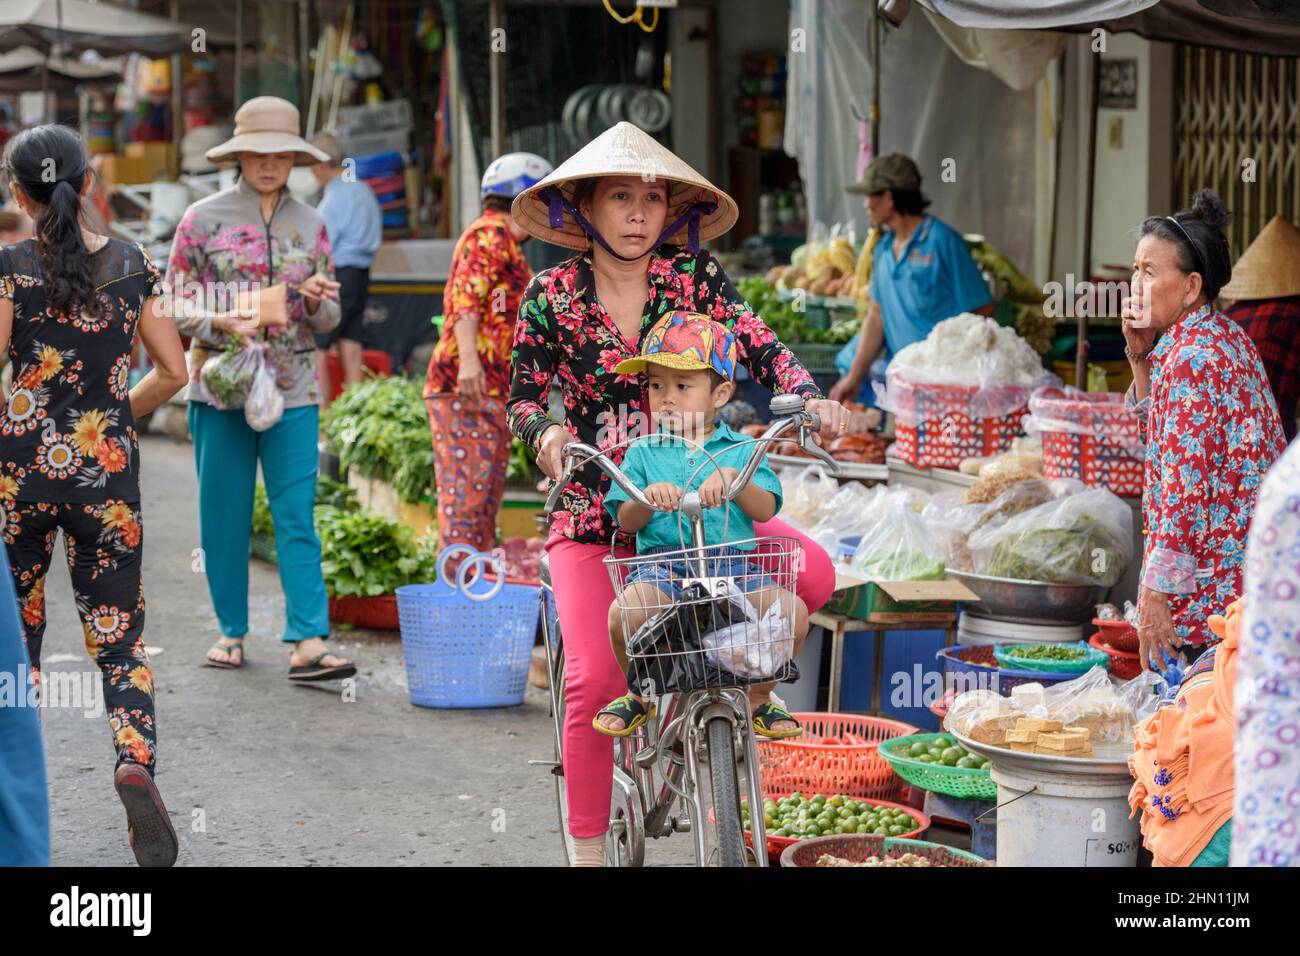 A Vietnamese woman cycles with her son through the busy food market in Cai Rang, near Can Tho, Mekong Delta, southern Vietnam Stock Photo